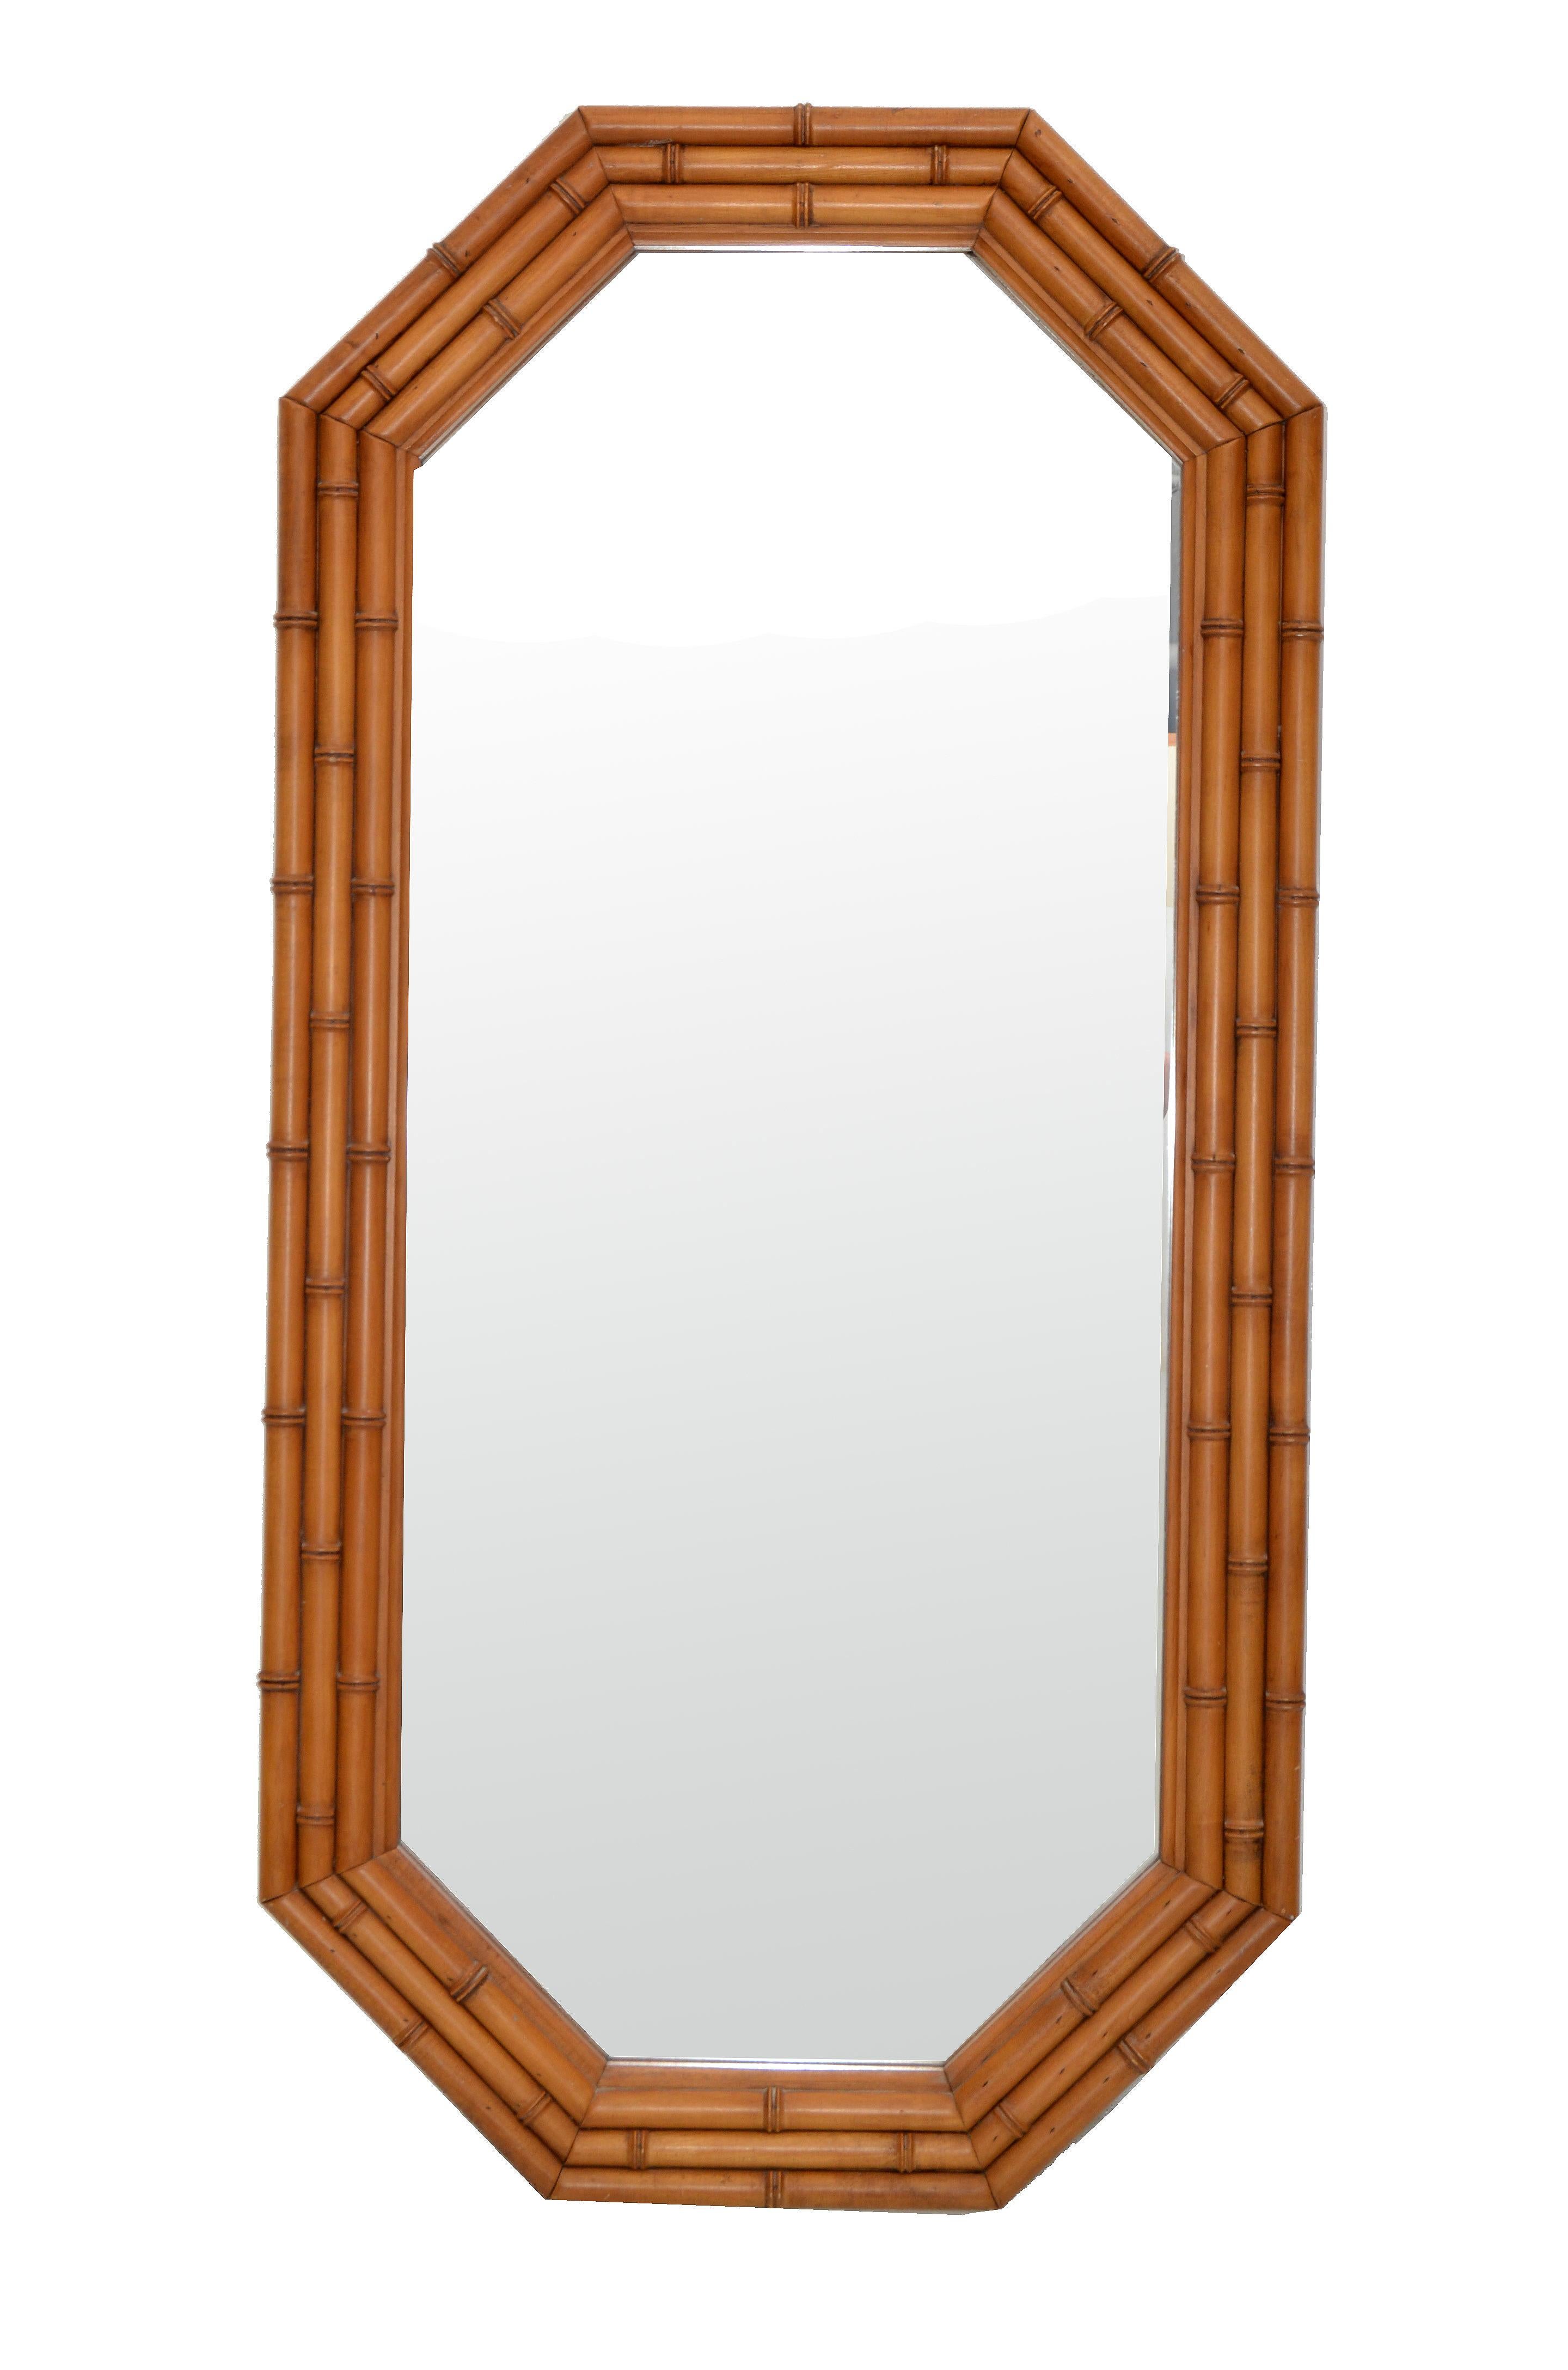 20th Century Octagonal Bohemian Chic Bamboo Wall Mirror Wood Backing Mid-Century Modern 50s For Sale